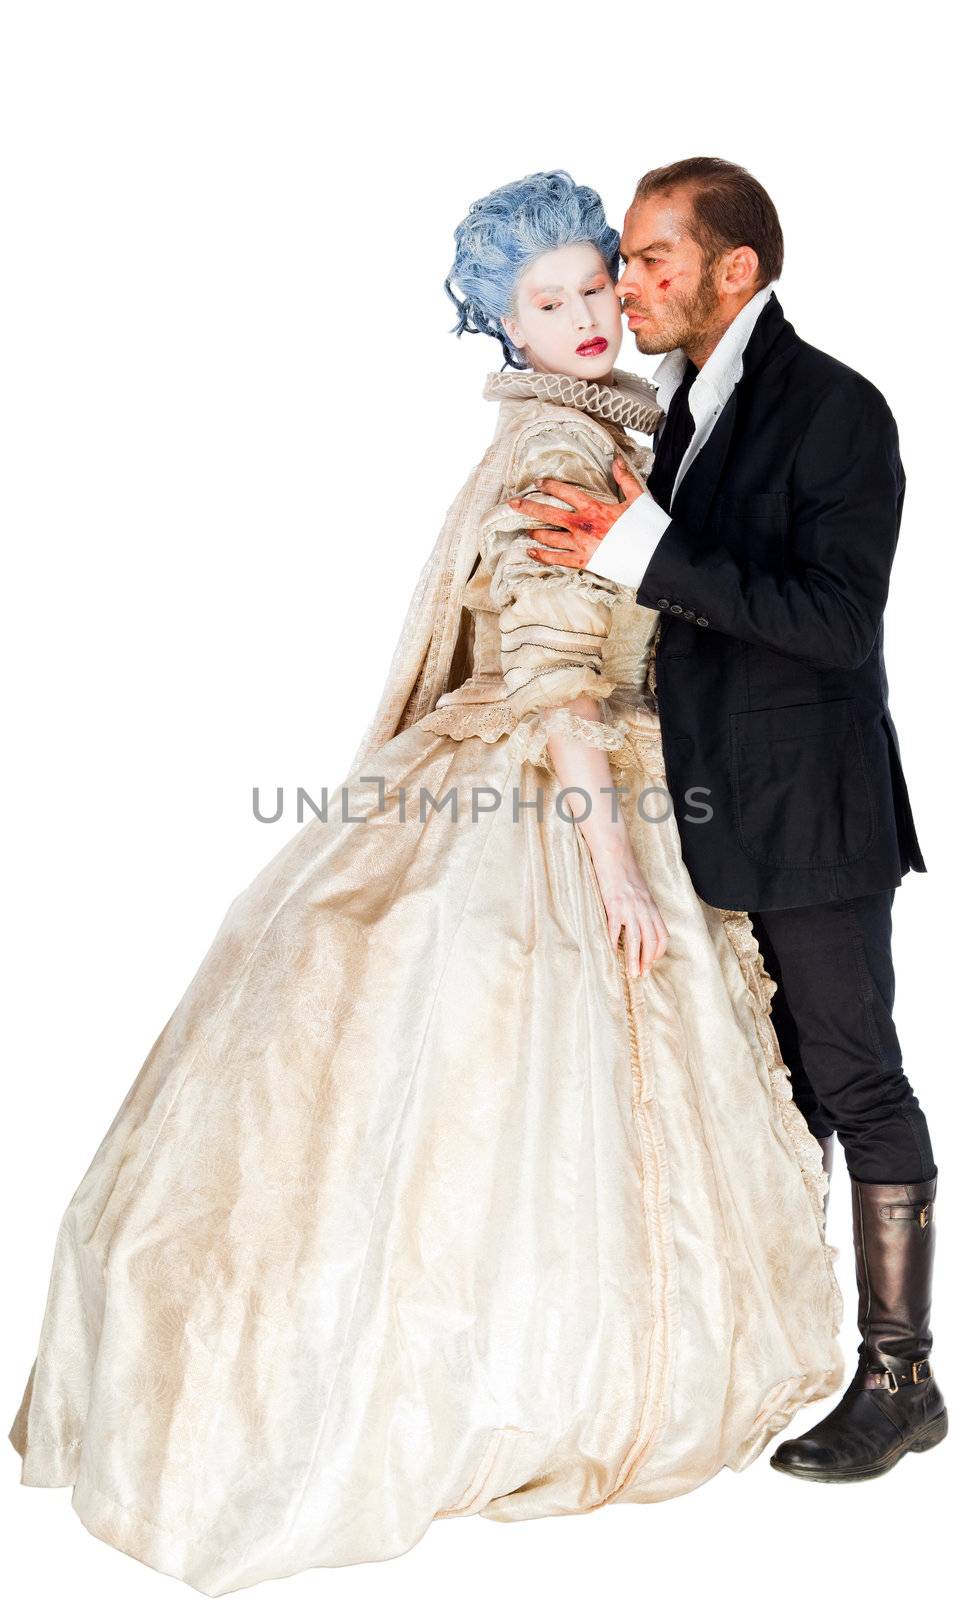 Male vampire embracing woman in medieval costume, isolated on white